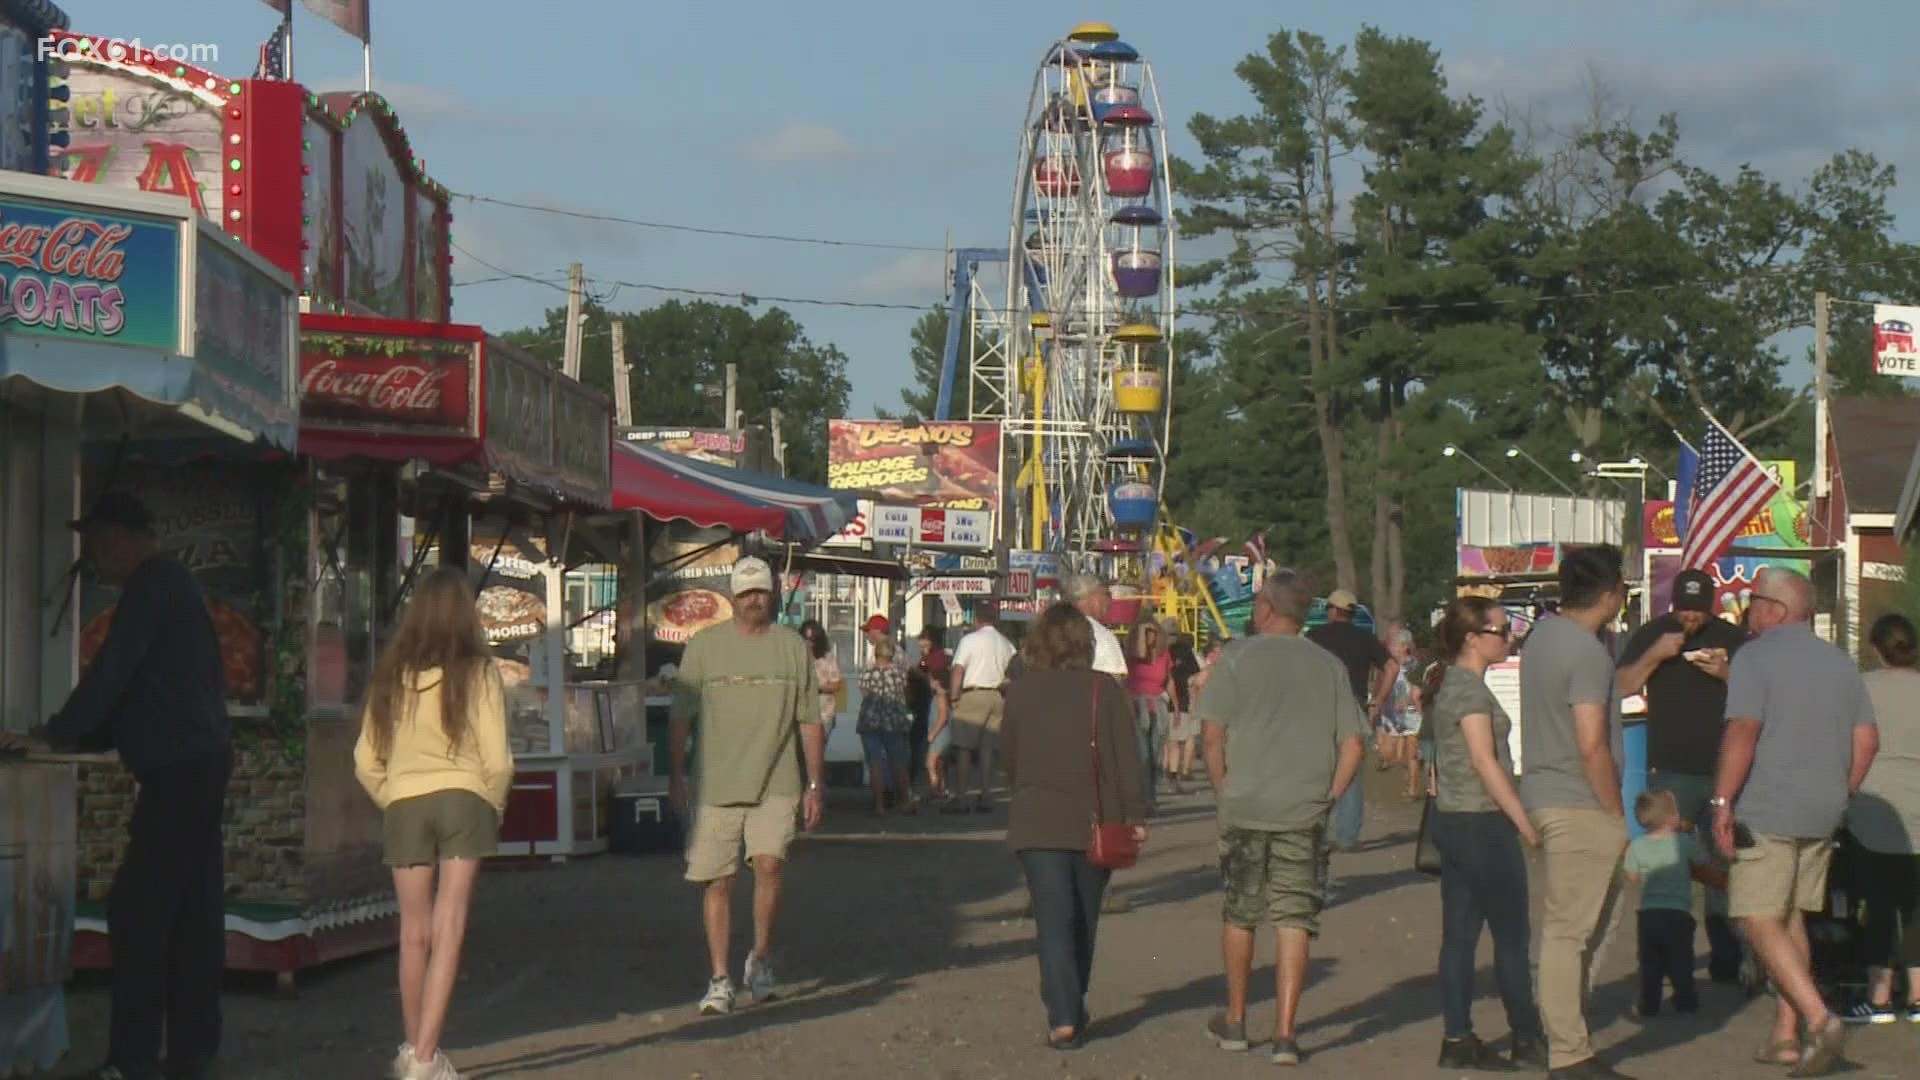 The fair has a history that dates back to the 1830s. It’s known as the oldest fair in New England. Residents are glad to get back to the fairgrounds this year.